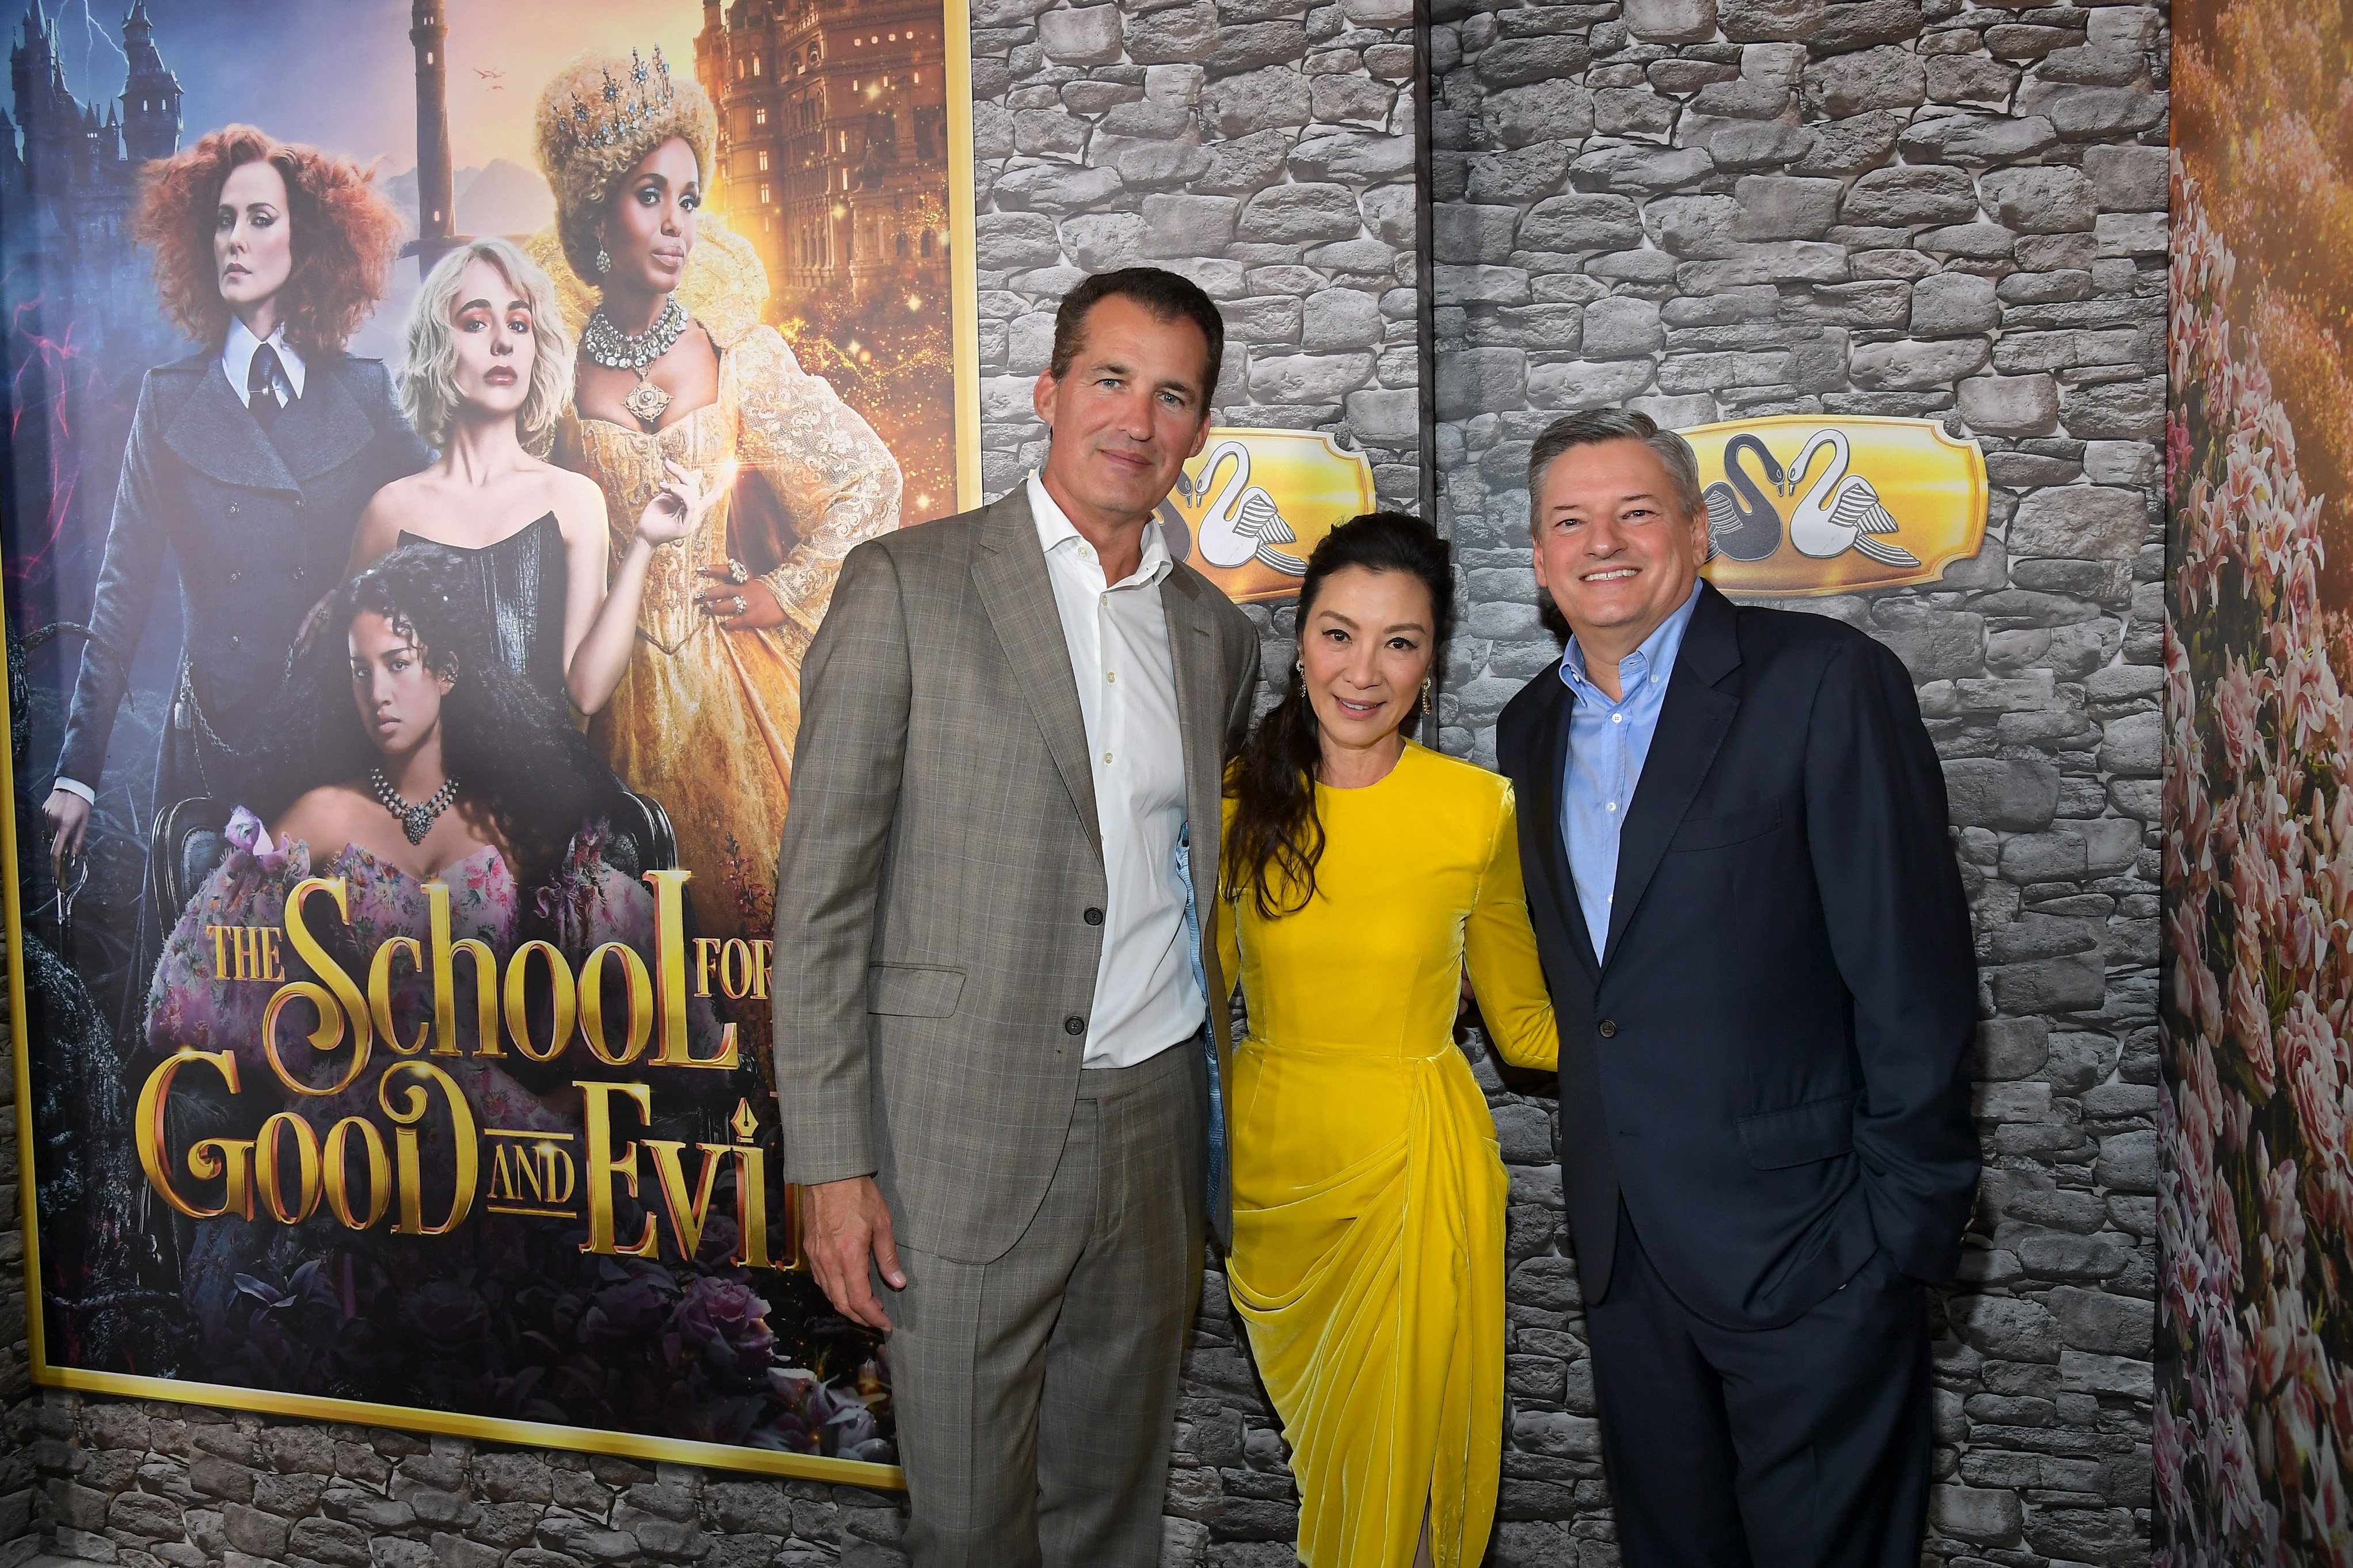 Scott Stuber, actress Michelle Yeoh, and Netflix Co-CEO and Chief Content Officer Ted Sarandos at the premiere of "The School For Good And Evil" on October 18, 2022 in Los Angeles, California. | Source: Getty Images